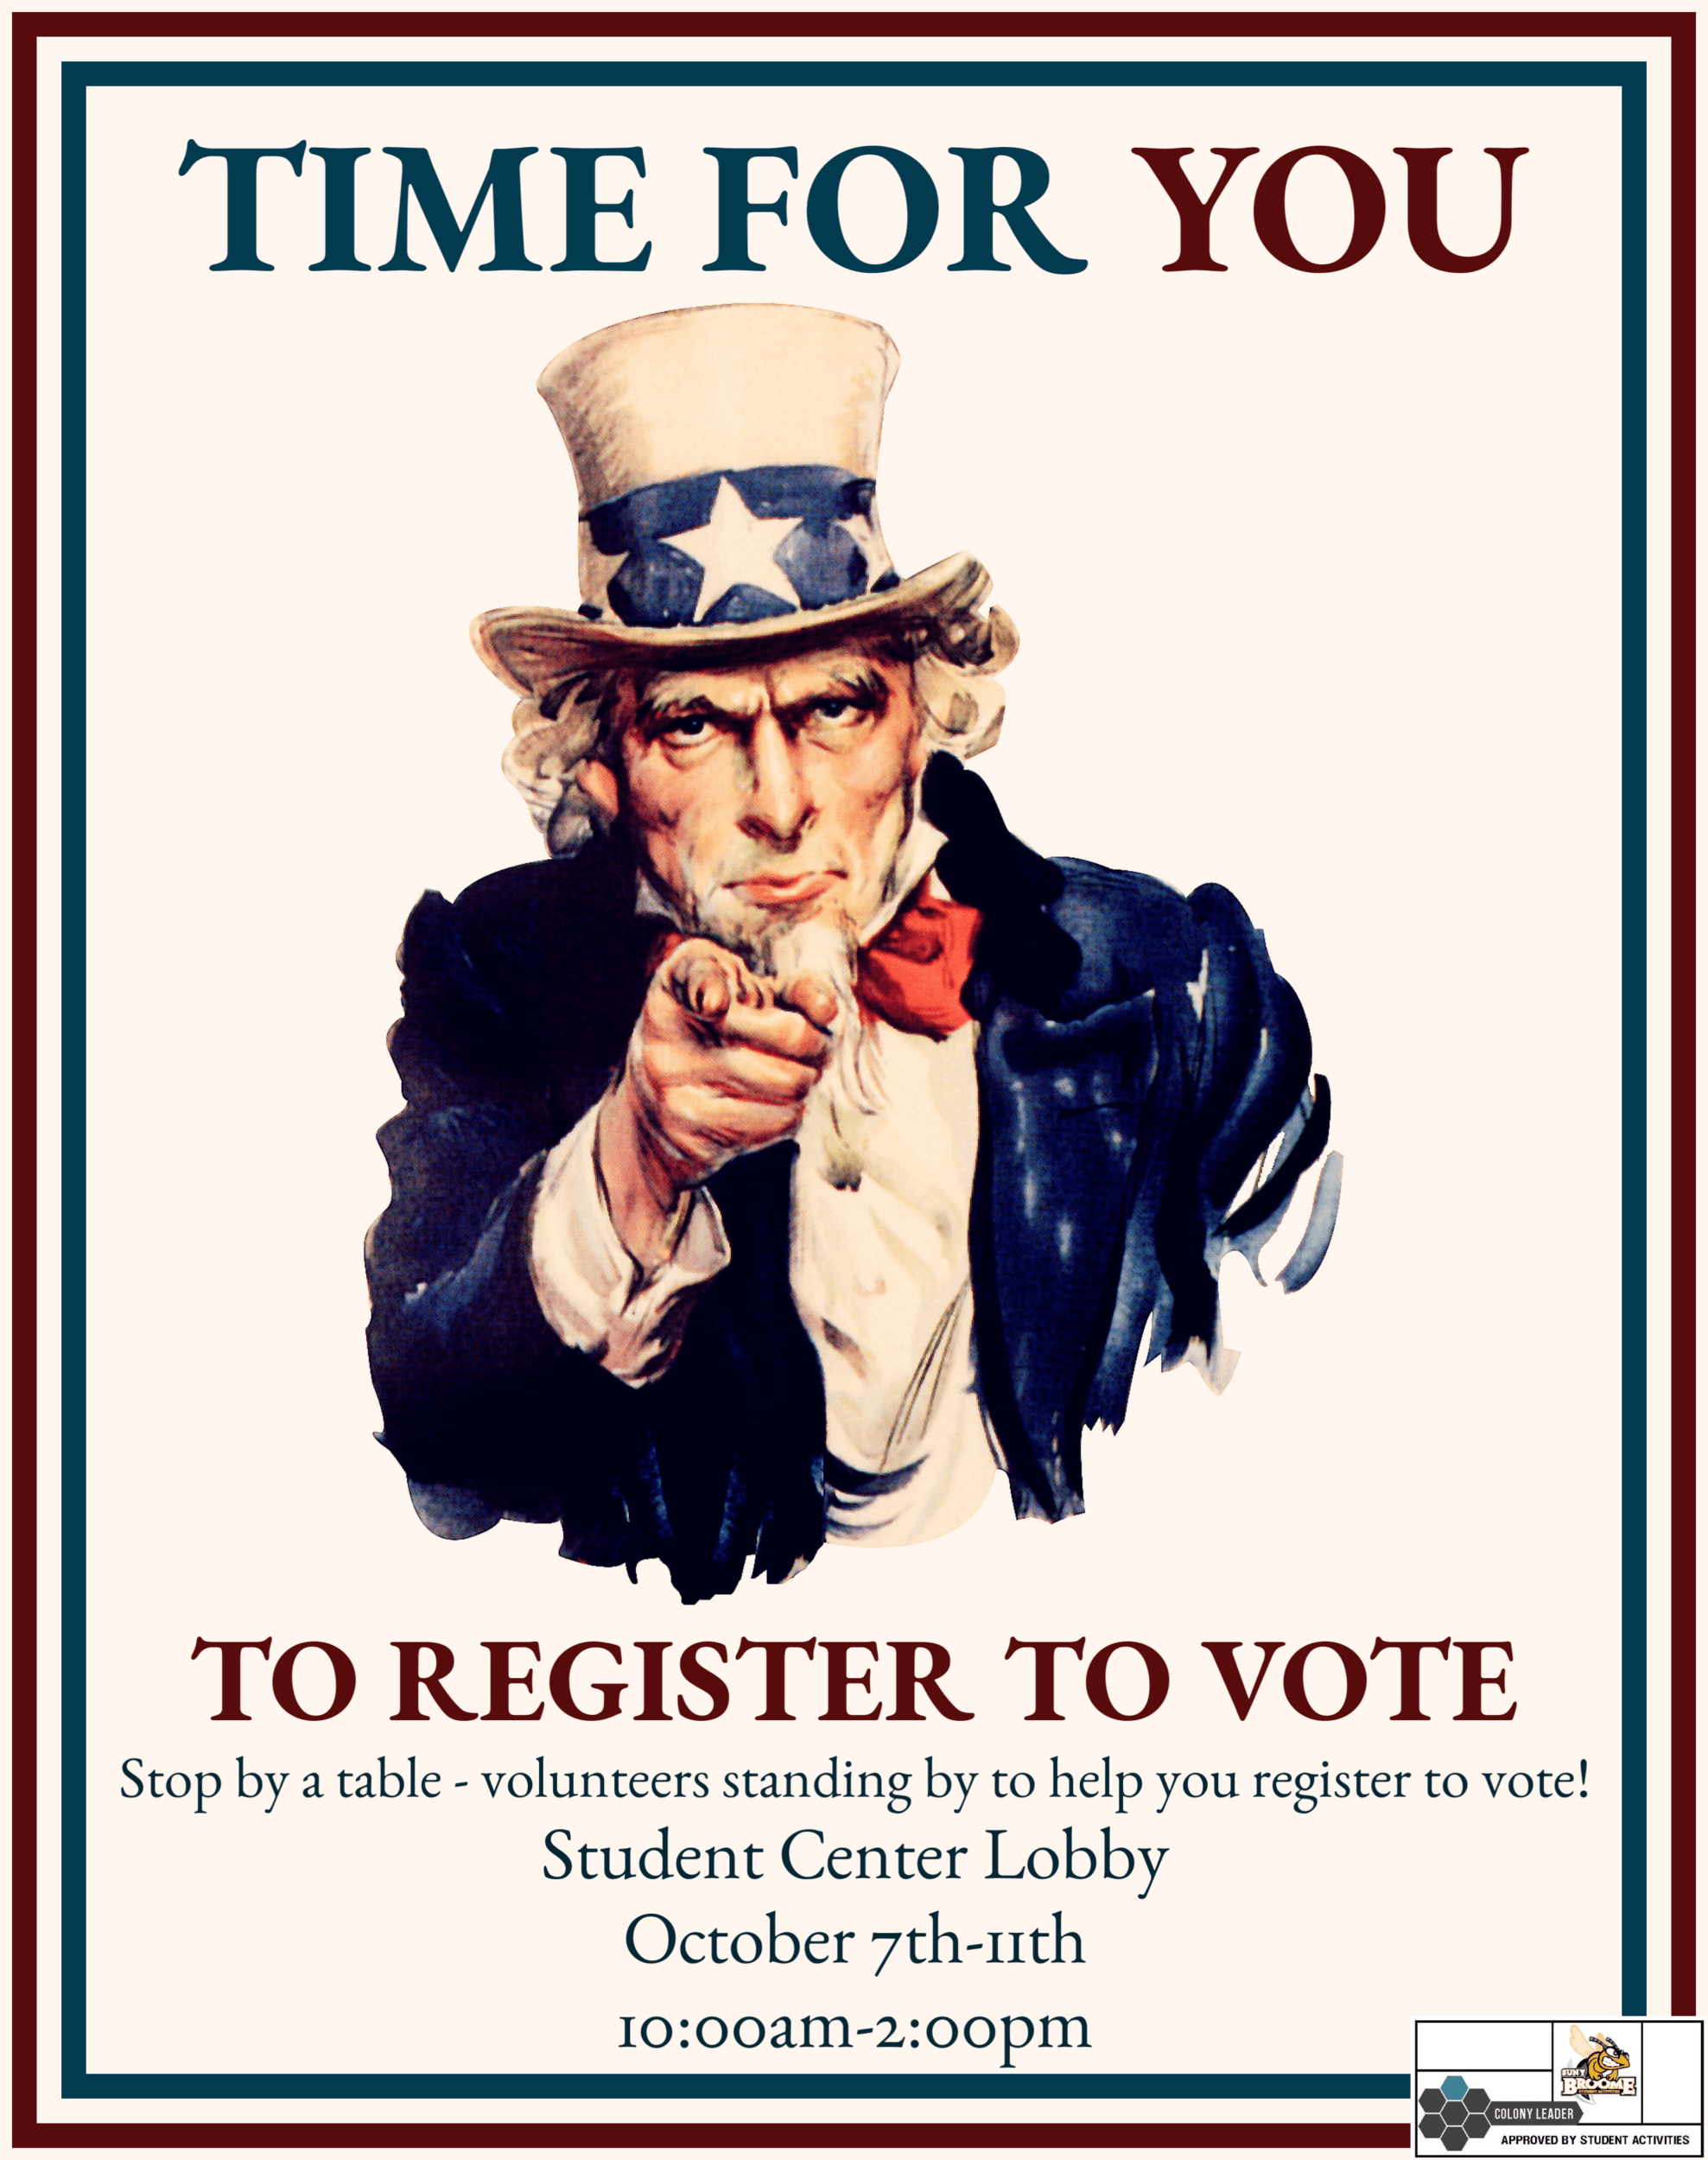 Make sure you're registered to vote! Stop by our voter registration table from 10 a.m. to 2 p.m. Oct. 7 through 11 in the Student Center Lobby.